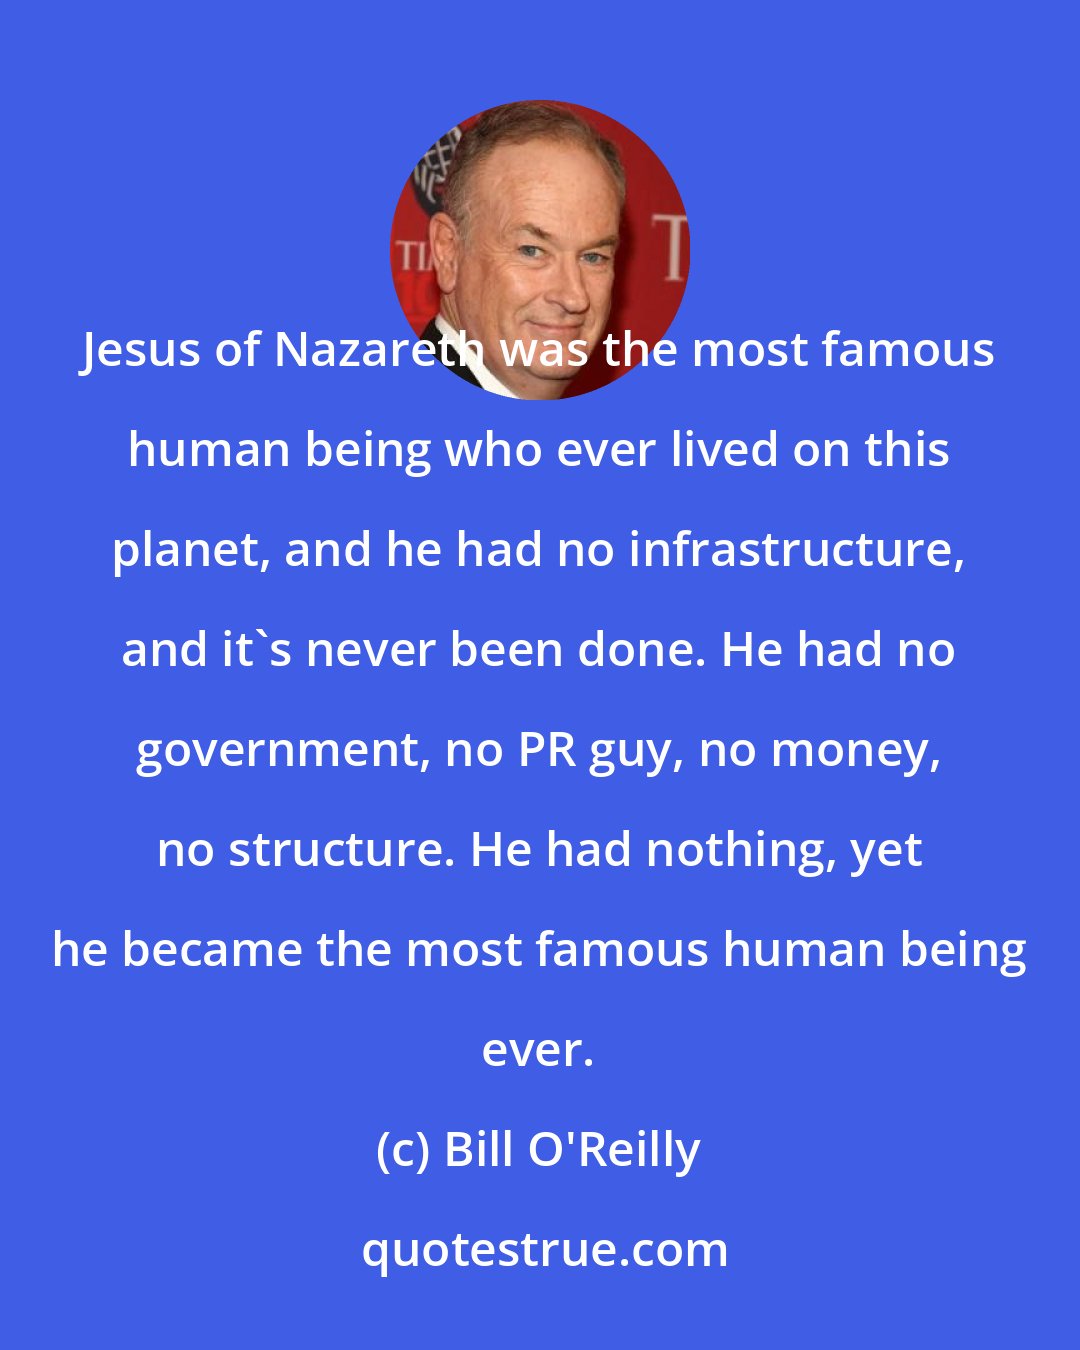 Bill O'Reilly: Jesus of Nazareth was the most famous human being who ever lived on this planet, and he had no infrastructure, and it's never been done. He had no government, no PR guy, no money, no structure. He had nothing, yet he became the most famous human being ever.